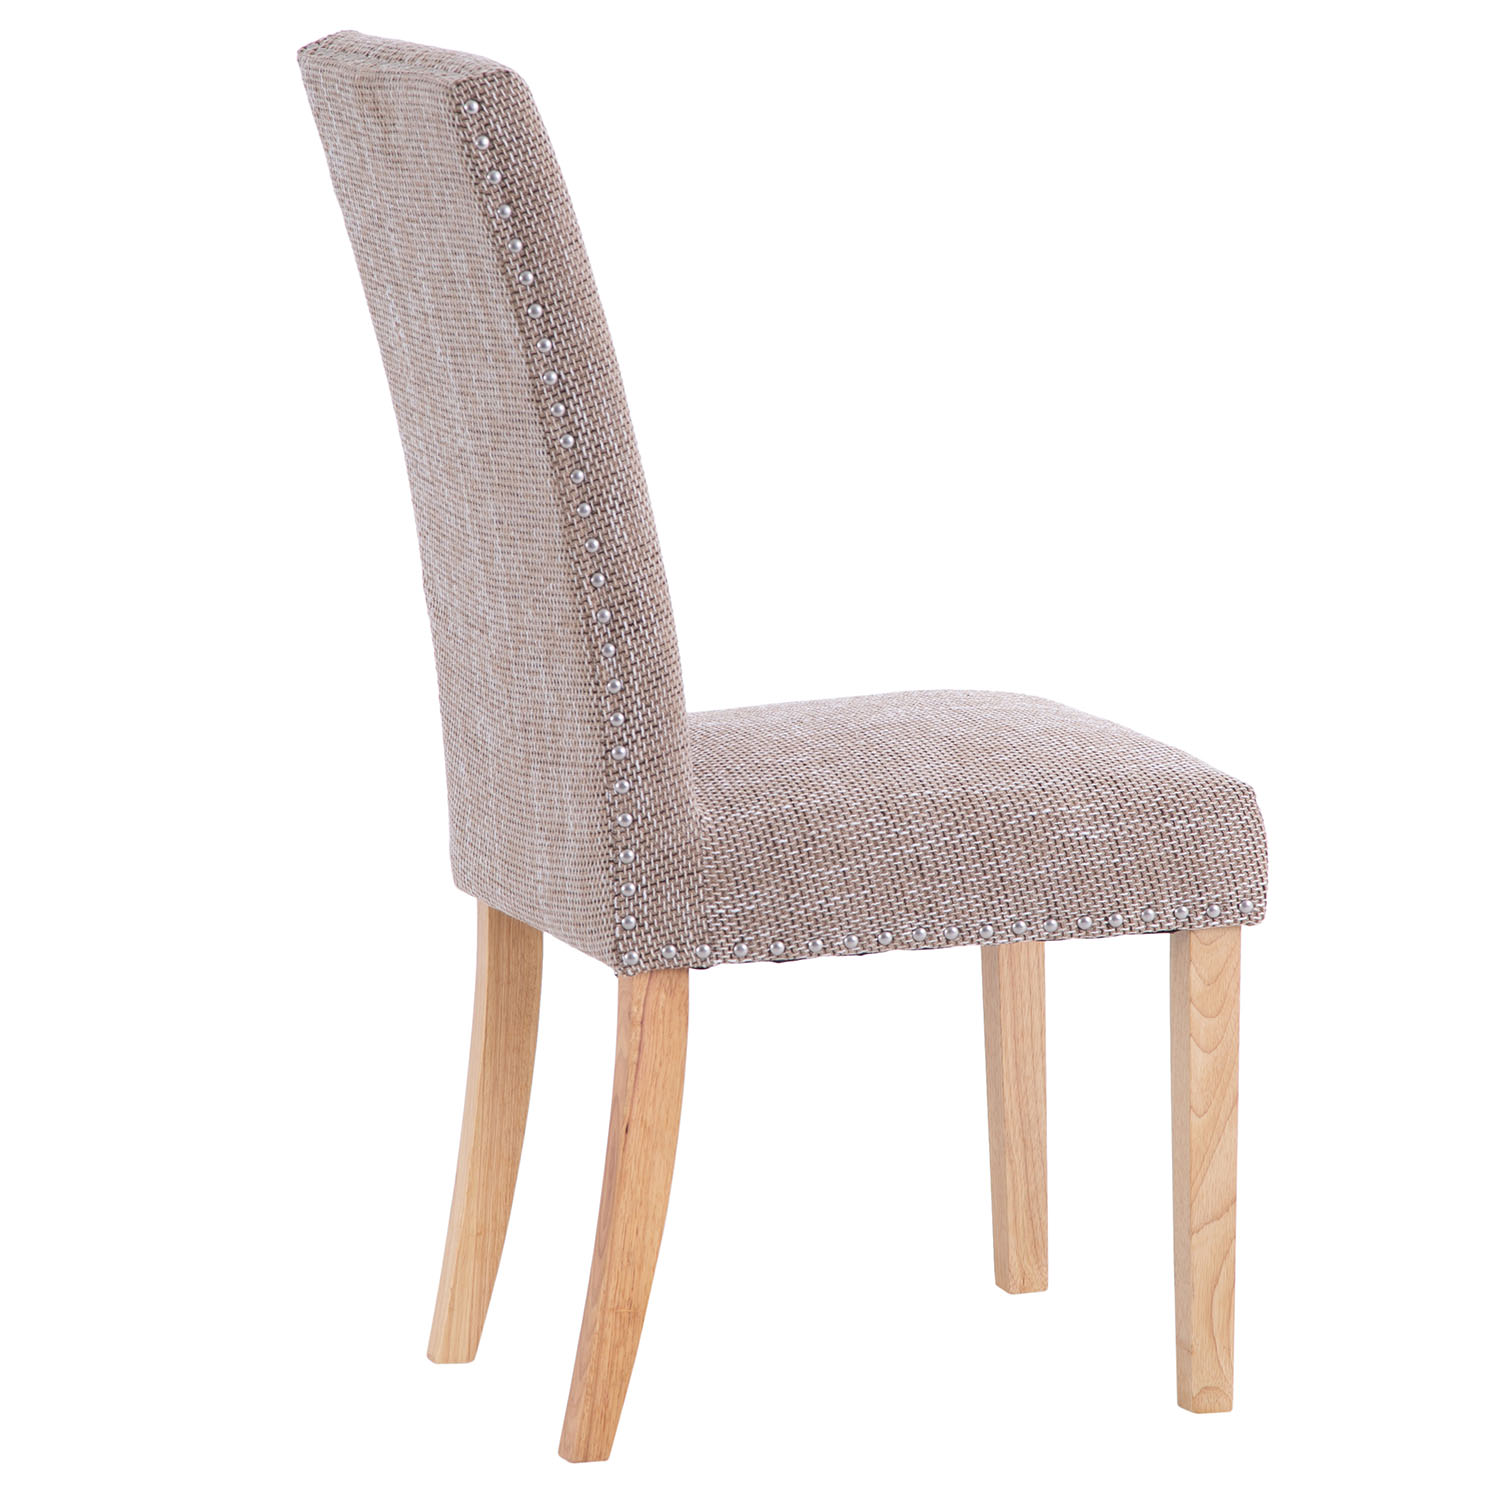 Studded Dining Chair Tweed Collingwood Batchellor